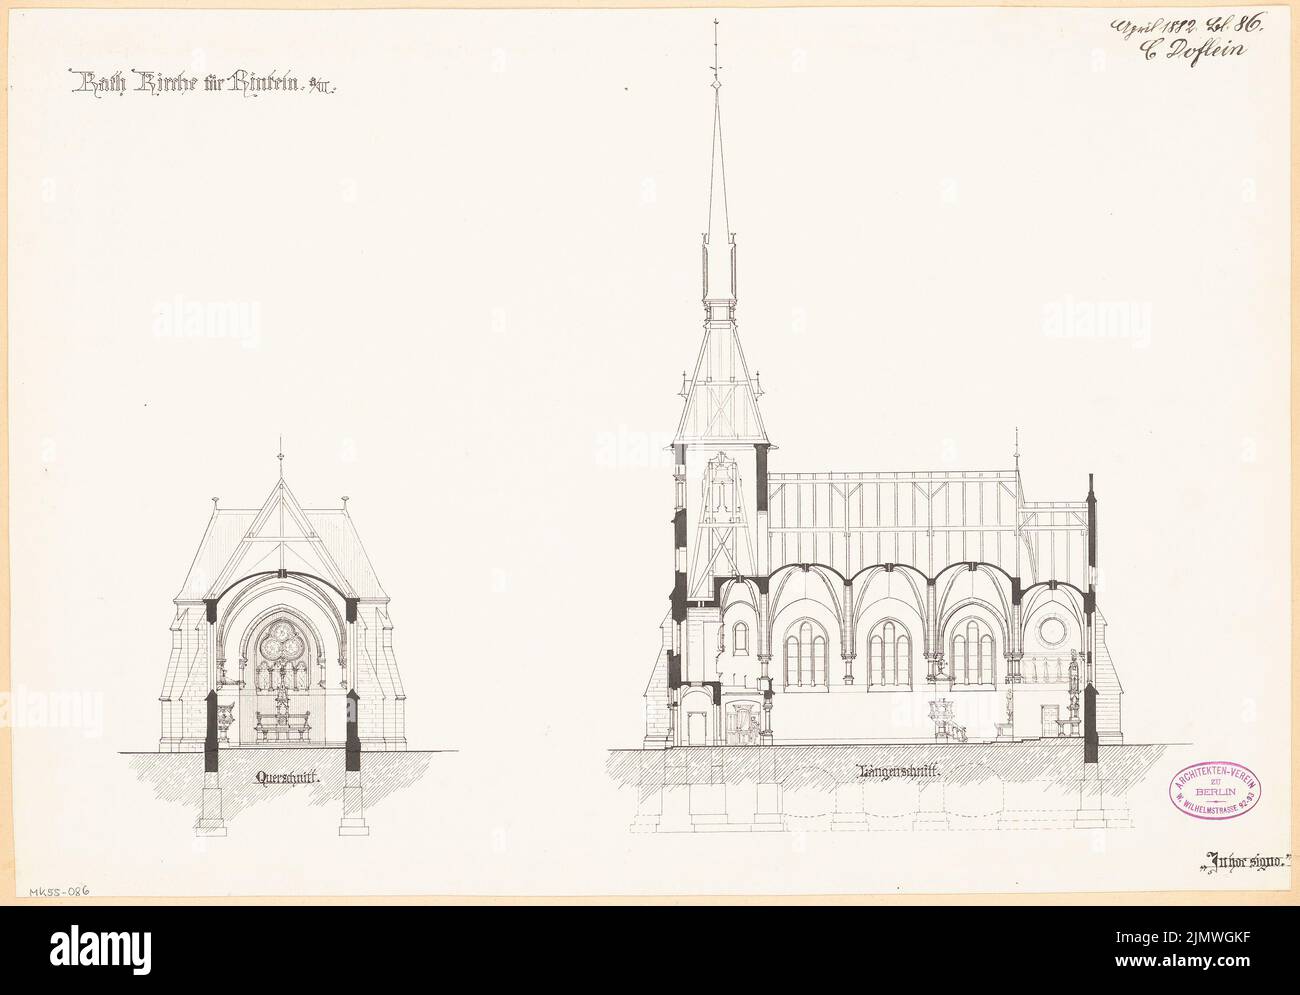 Doflein Karl (1856-1943), Catholic Church of St. Sturmius in Rinteln. Monthly competition April 1882 (04.1882): Perspective view. Ink on paper, 37.4 x 53.7 cm (including scan edges) Doflein Karl  (1856-1943): Katholische Kirche St. Sturmius, Rinteln. Monatskonkurrenz April 1882 Stock Photo